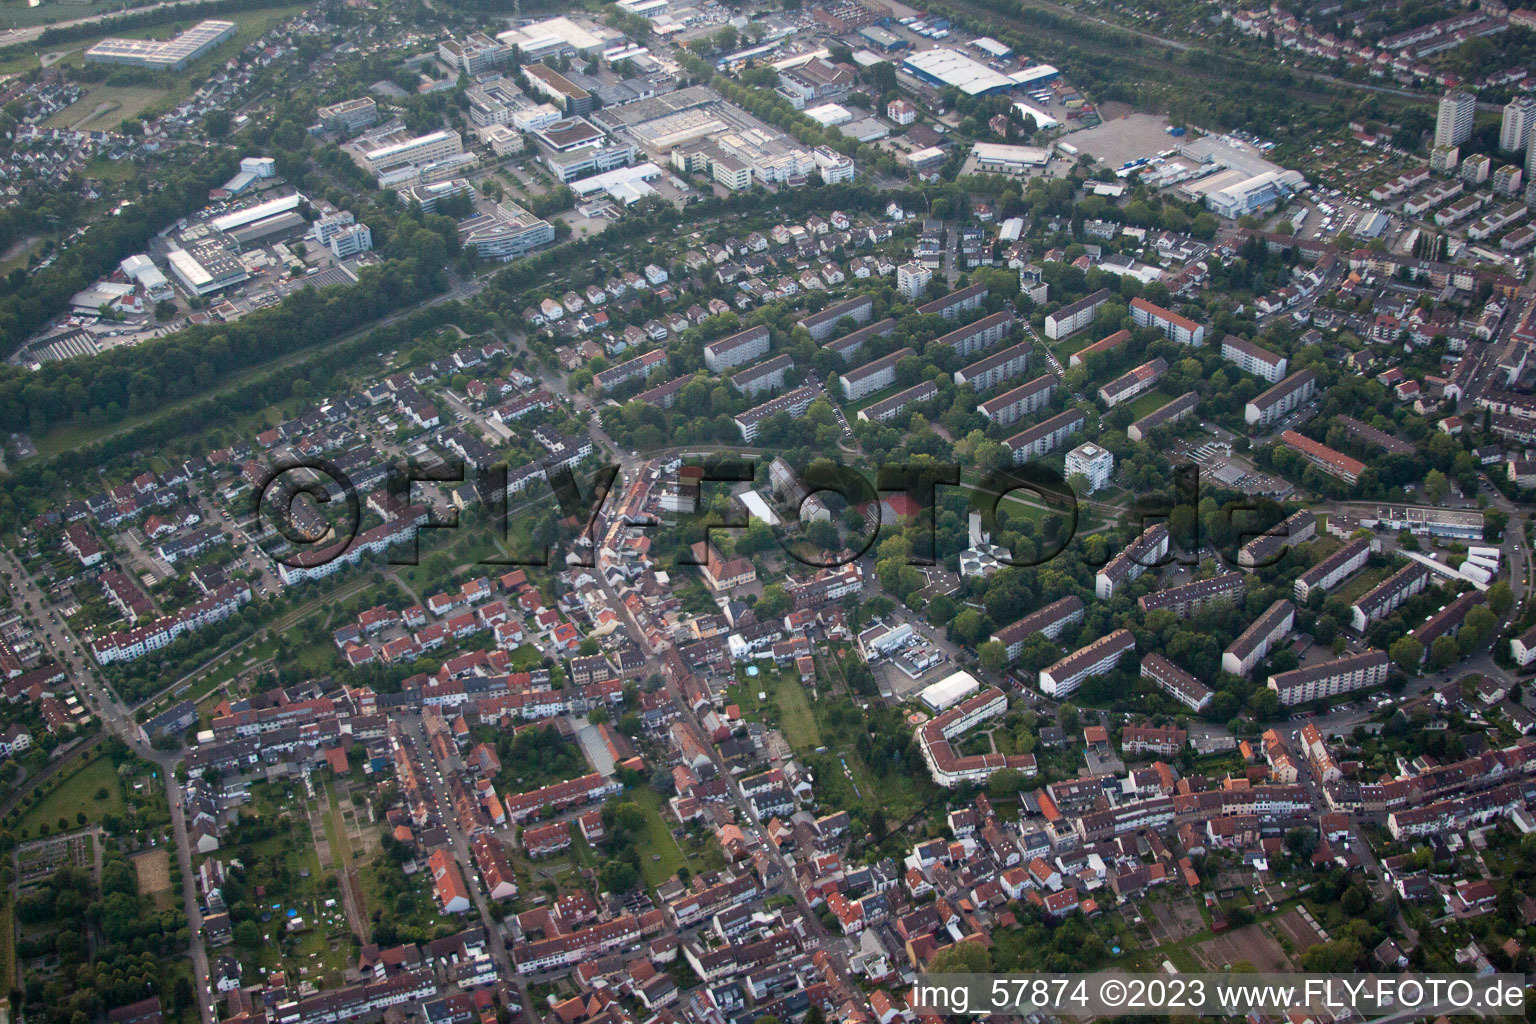 District Durlach in Karlsruhe in the state Baden-Wuerttemberg, Germany from above